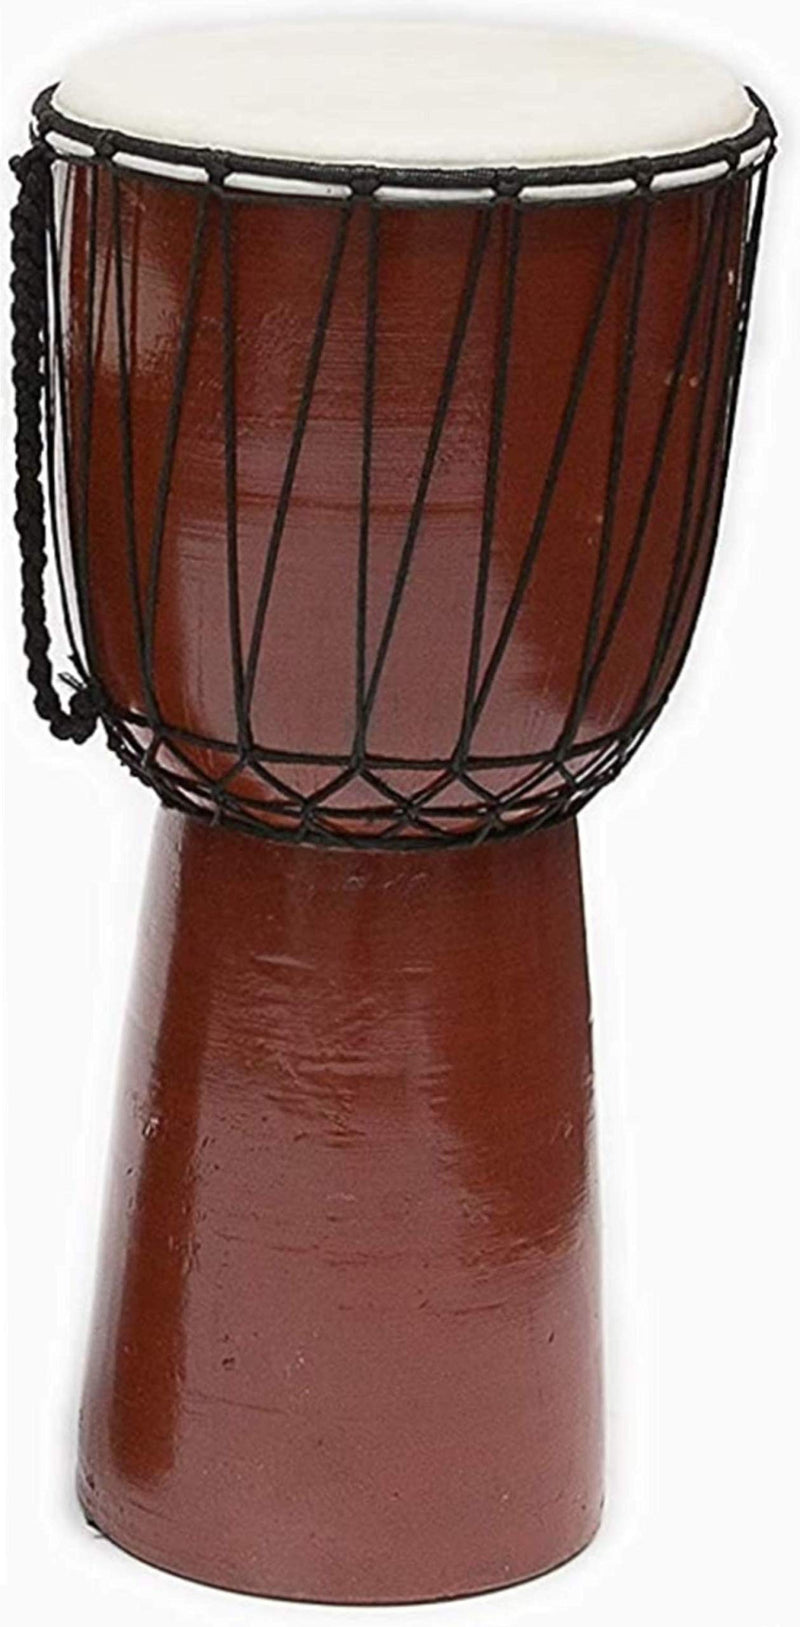 B.N.D TOP Drums Djembe Drum Djembe jembe is a Rope- Goat Skin Covered Goblet Drum Played with Bare Hands Originally from West Africa (6x12) 6x12